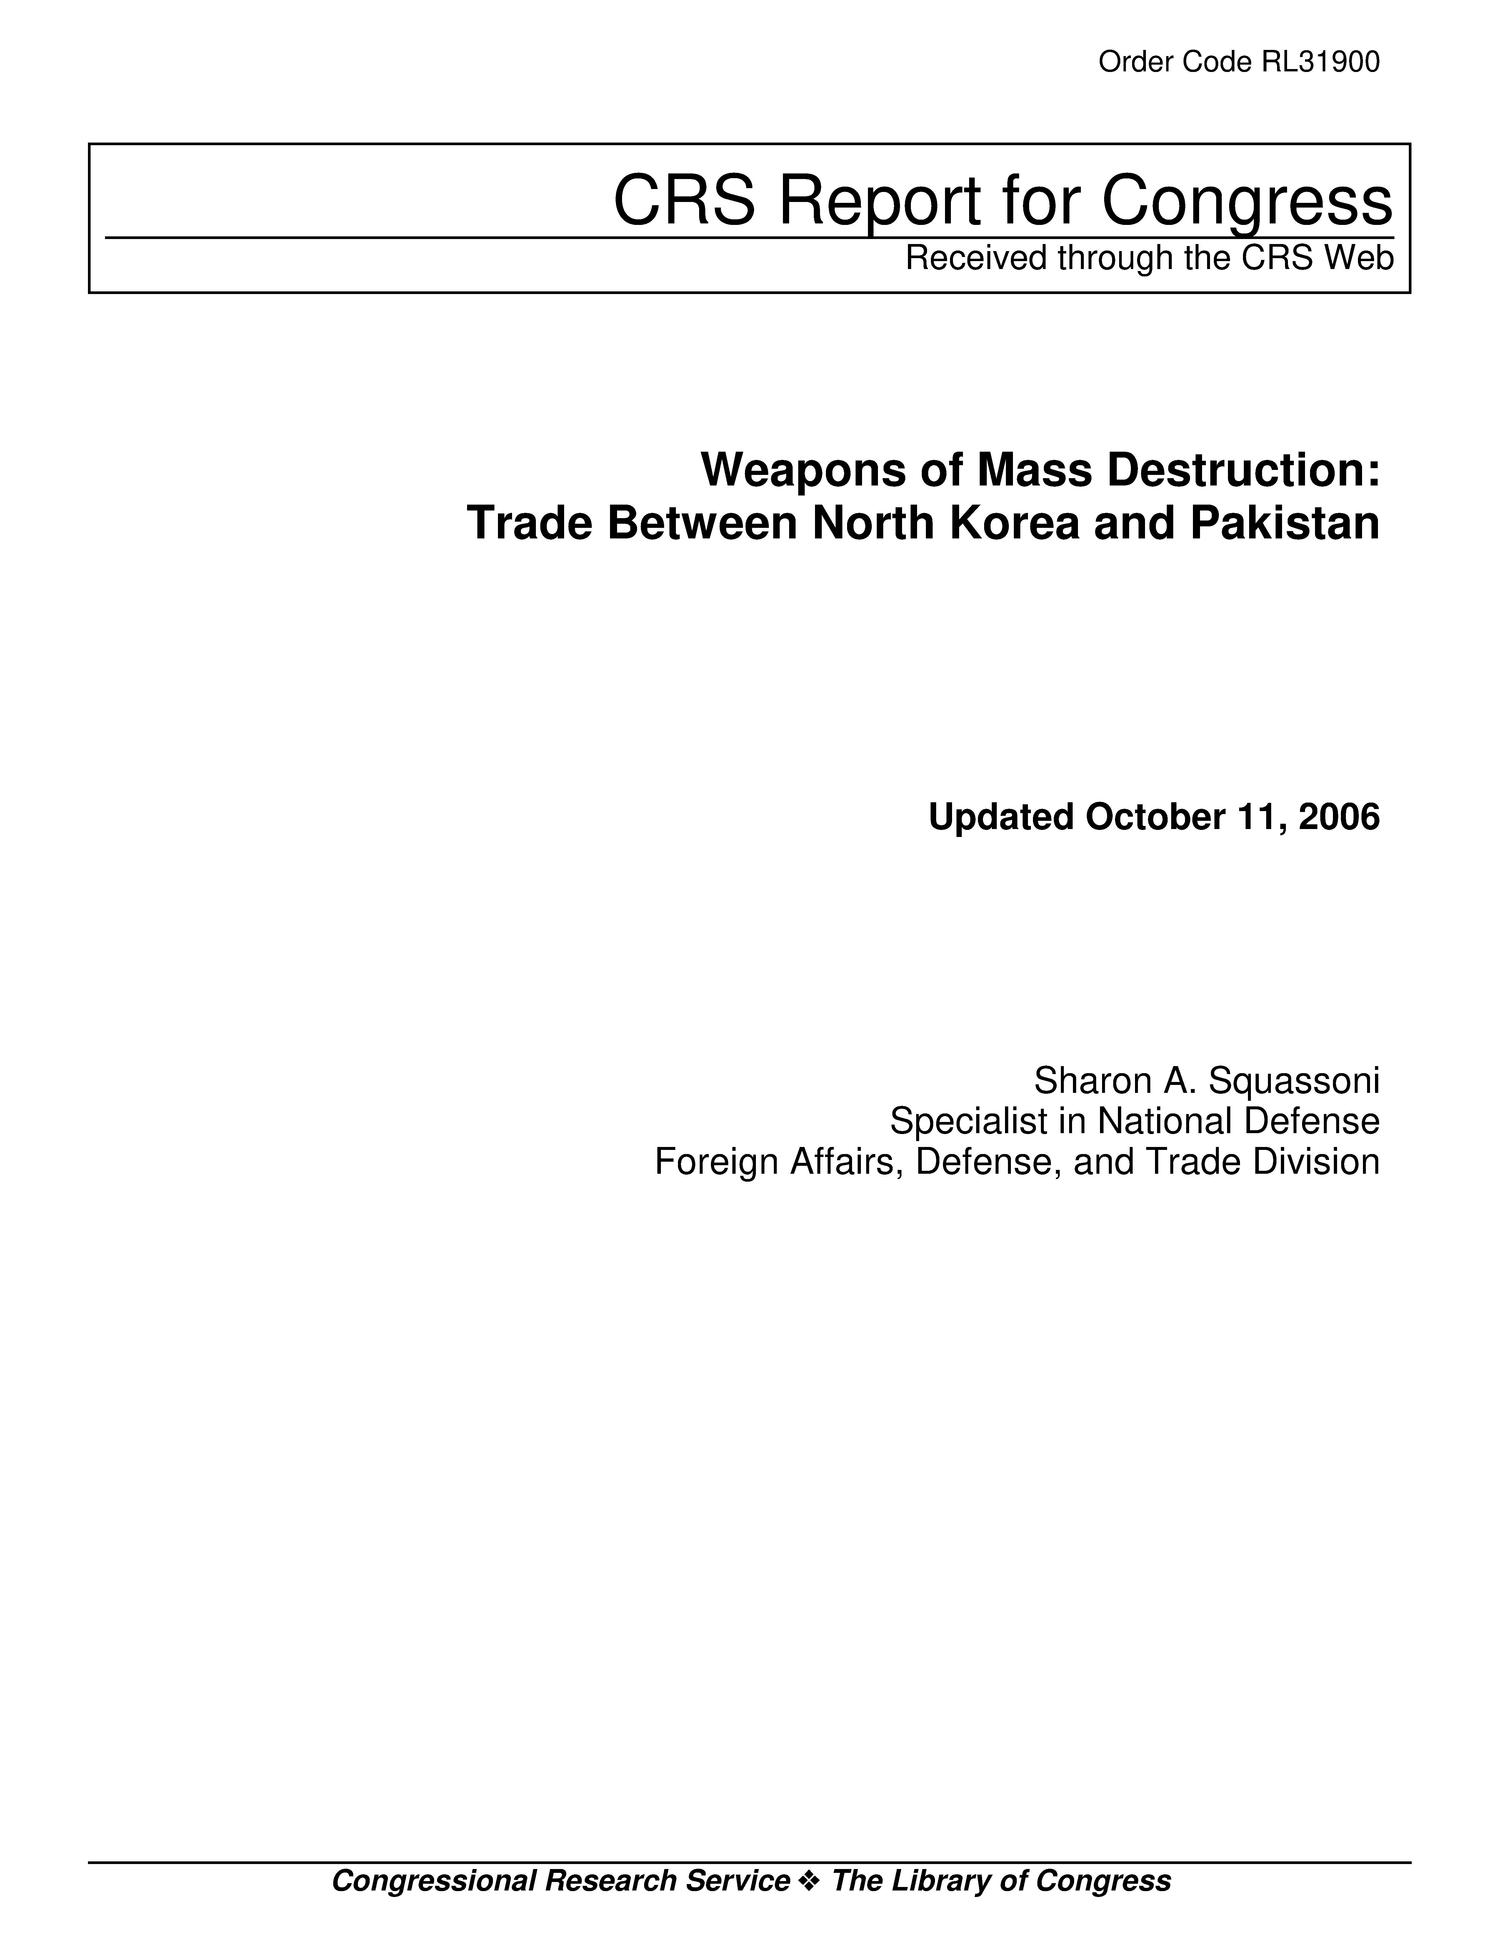 Weapons of Mass Destruction: Trade Between North Korea and Pakistan
                                                
                                                    [Sequence #]: 1 of 20
                                                